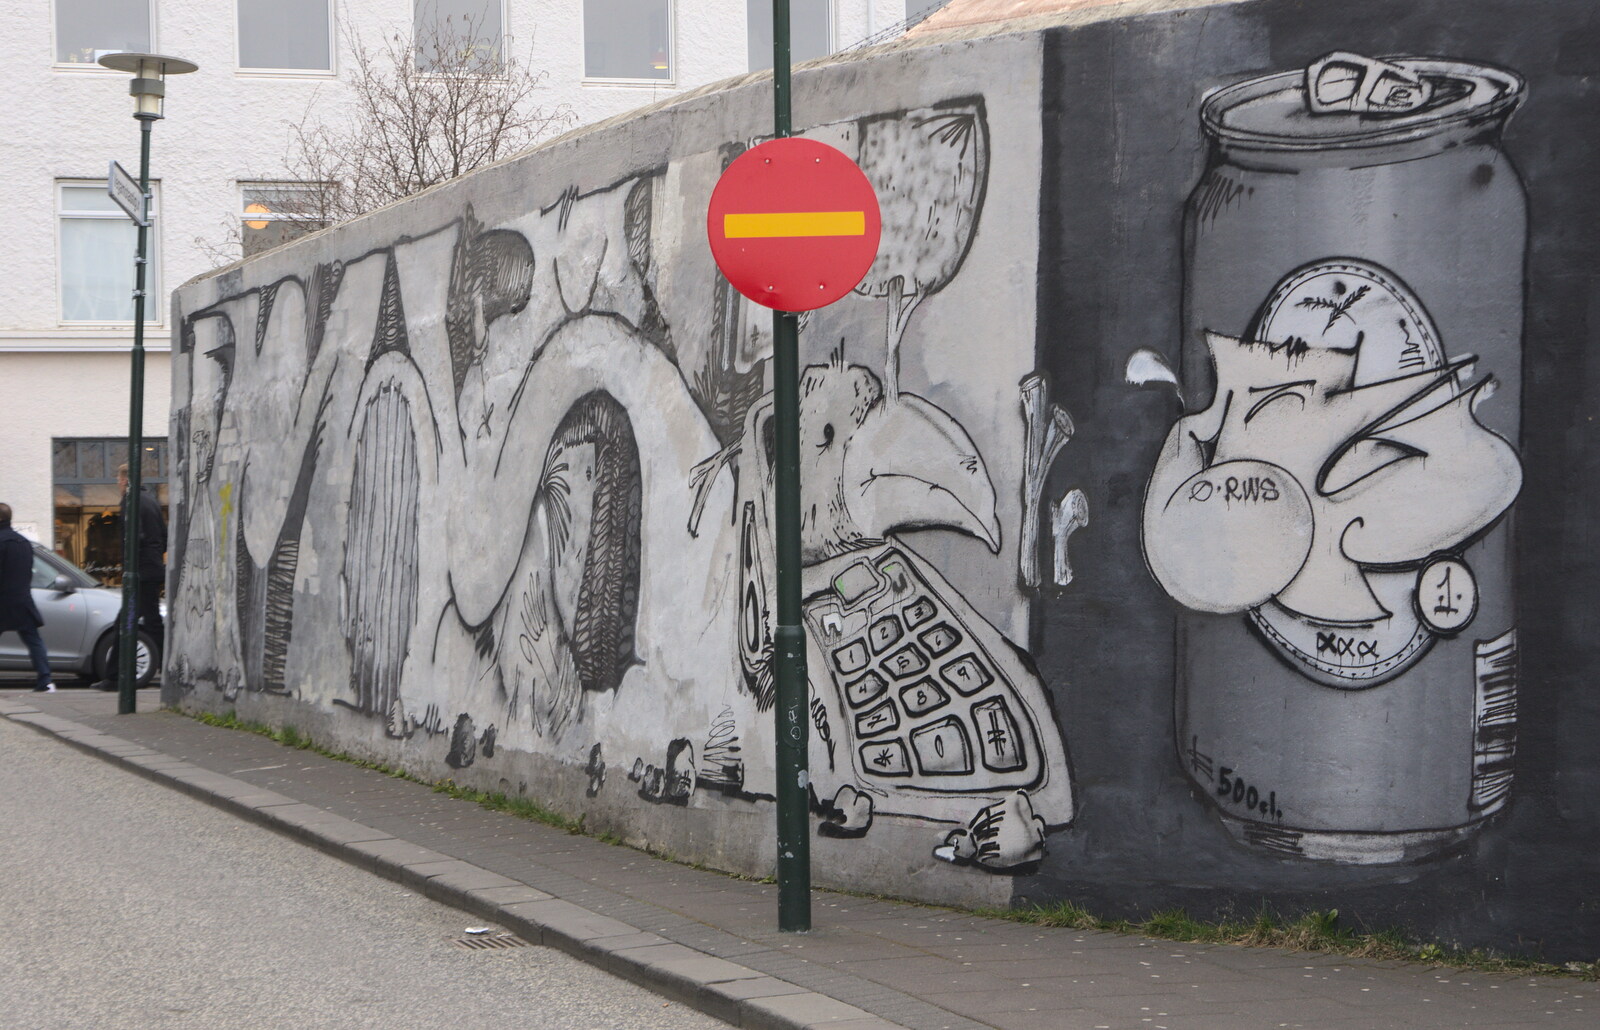 No entry and a can of beer from Stríðsminjar War Relics, Perlan and Street Art, Reykjavik, Iceland - 23rd April 2017